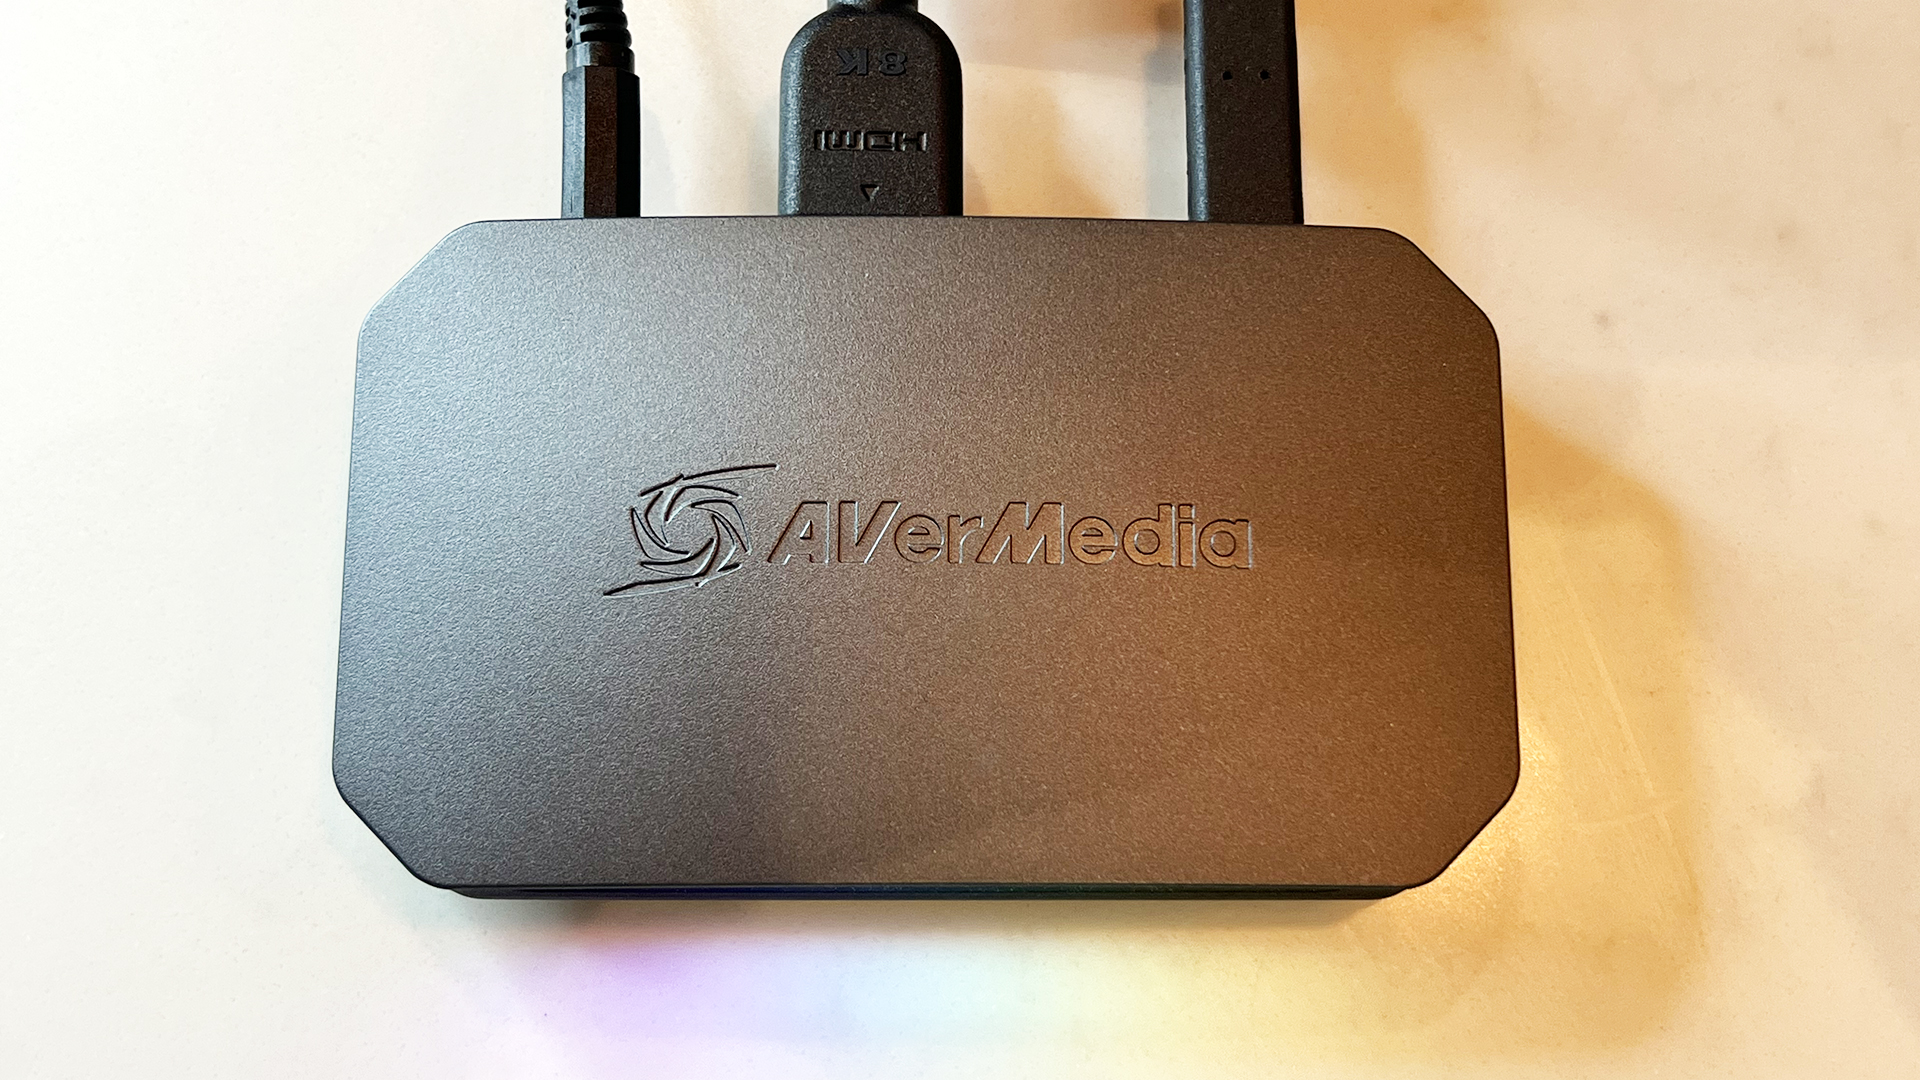 AverMedia Live Gamer Ultra 2.1 review image showing the product from above.